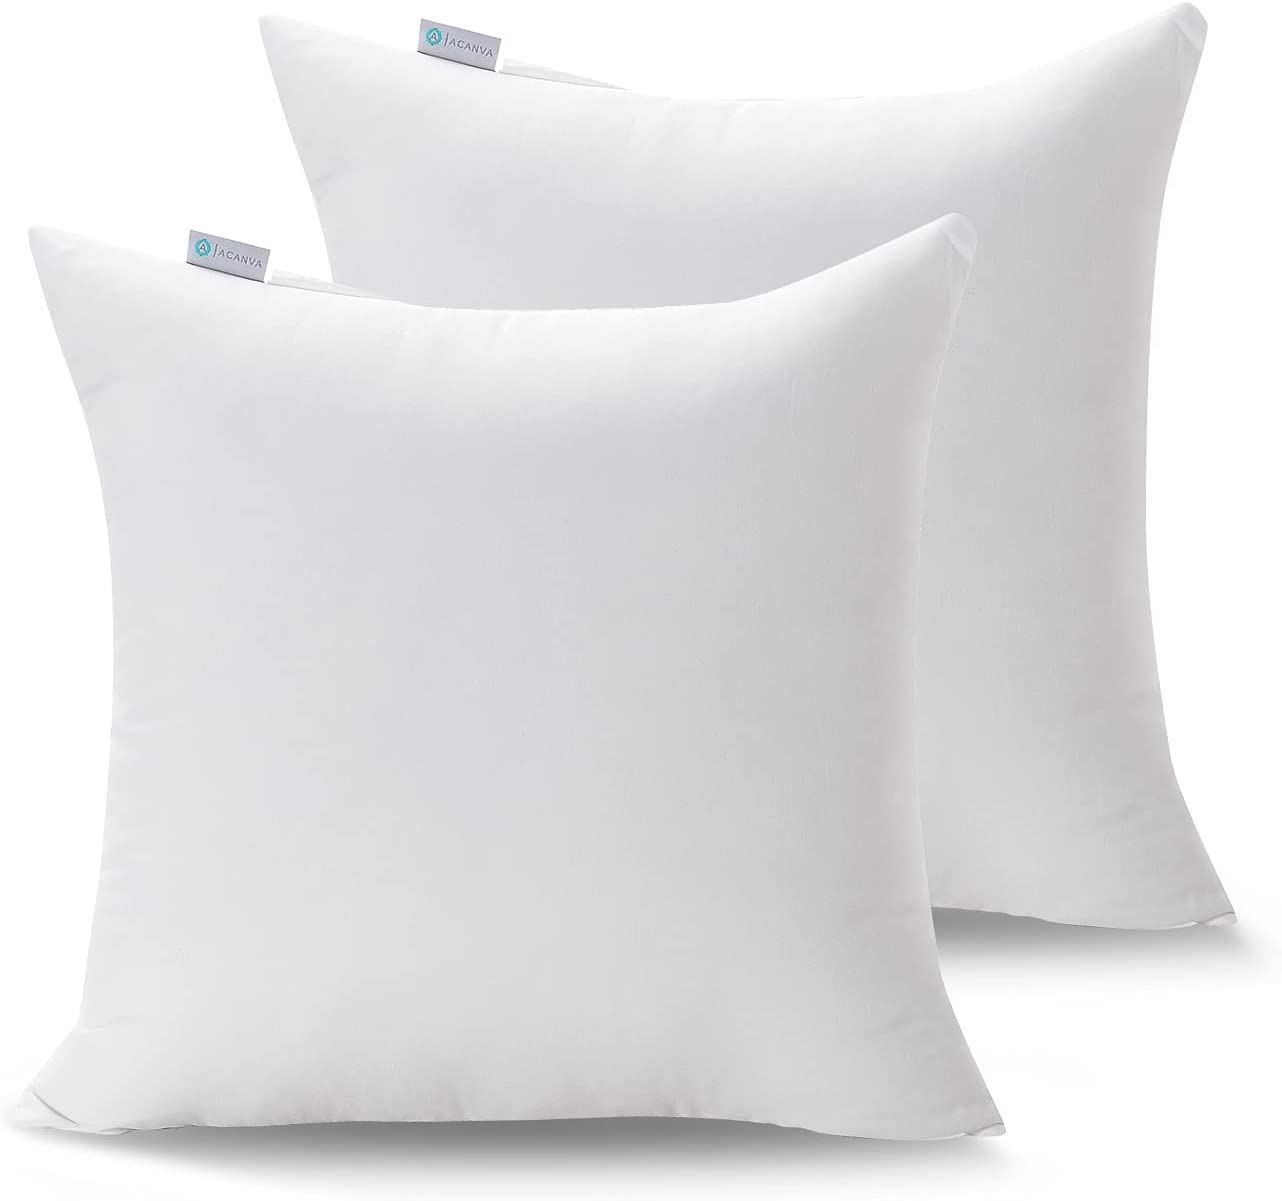 Set of 2 - Pillow Insert 18x18 Decorative Throw Pillow Inserts - Euro Sham  Stuffer for Sofa Bed Couch Square White Form 2 Pack - Hypoallergenic